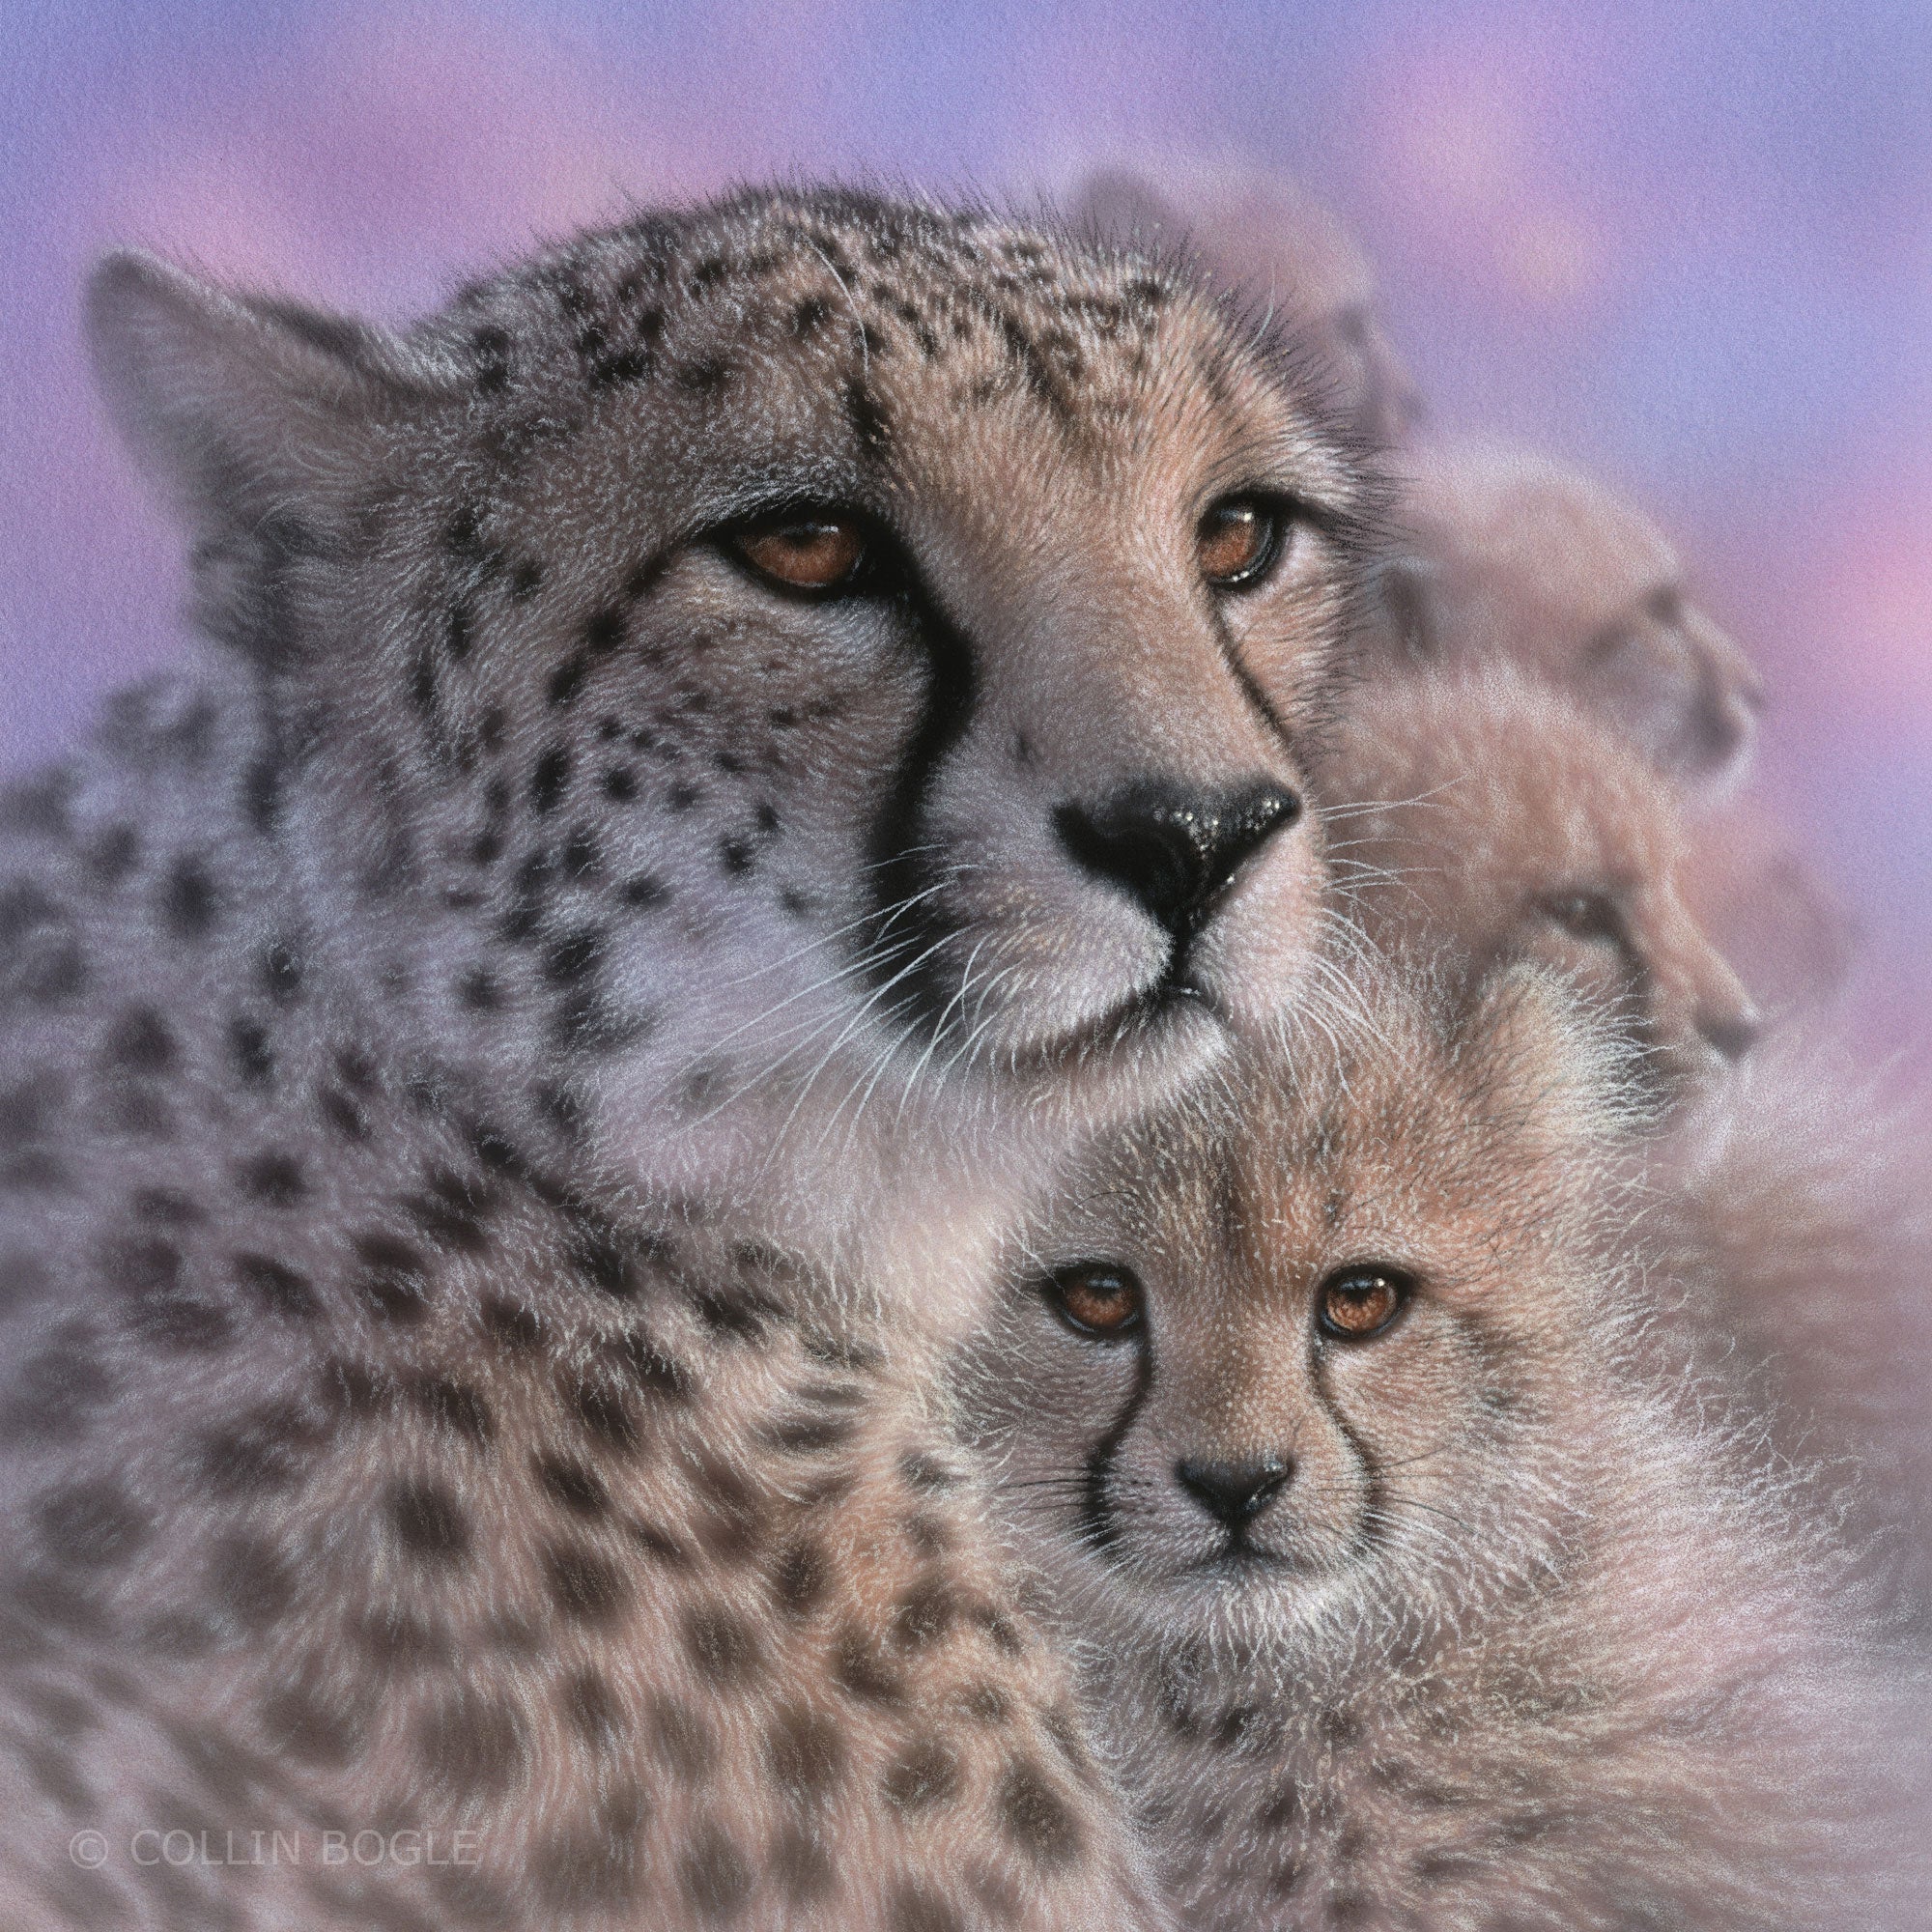 Mother's Love - Cheetah mother and cubs painting art print by Collin Bogle.